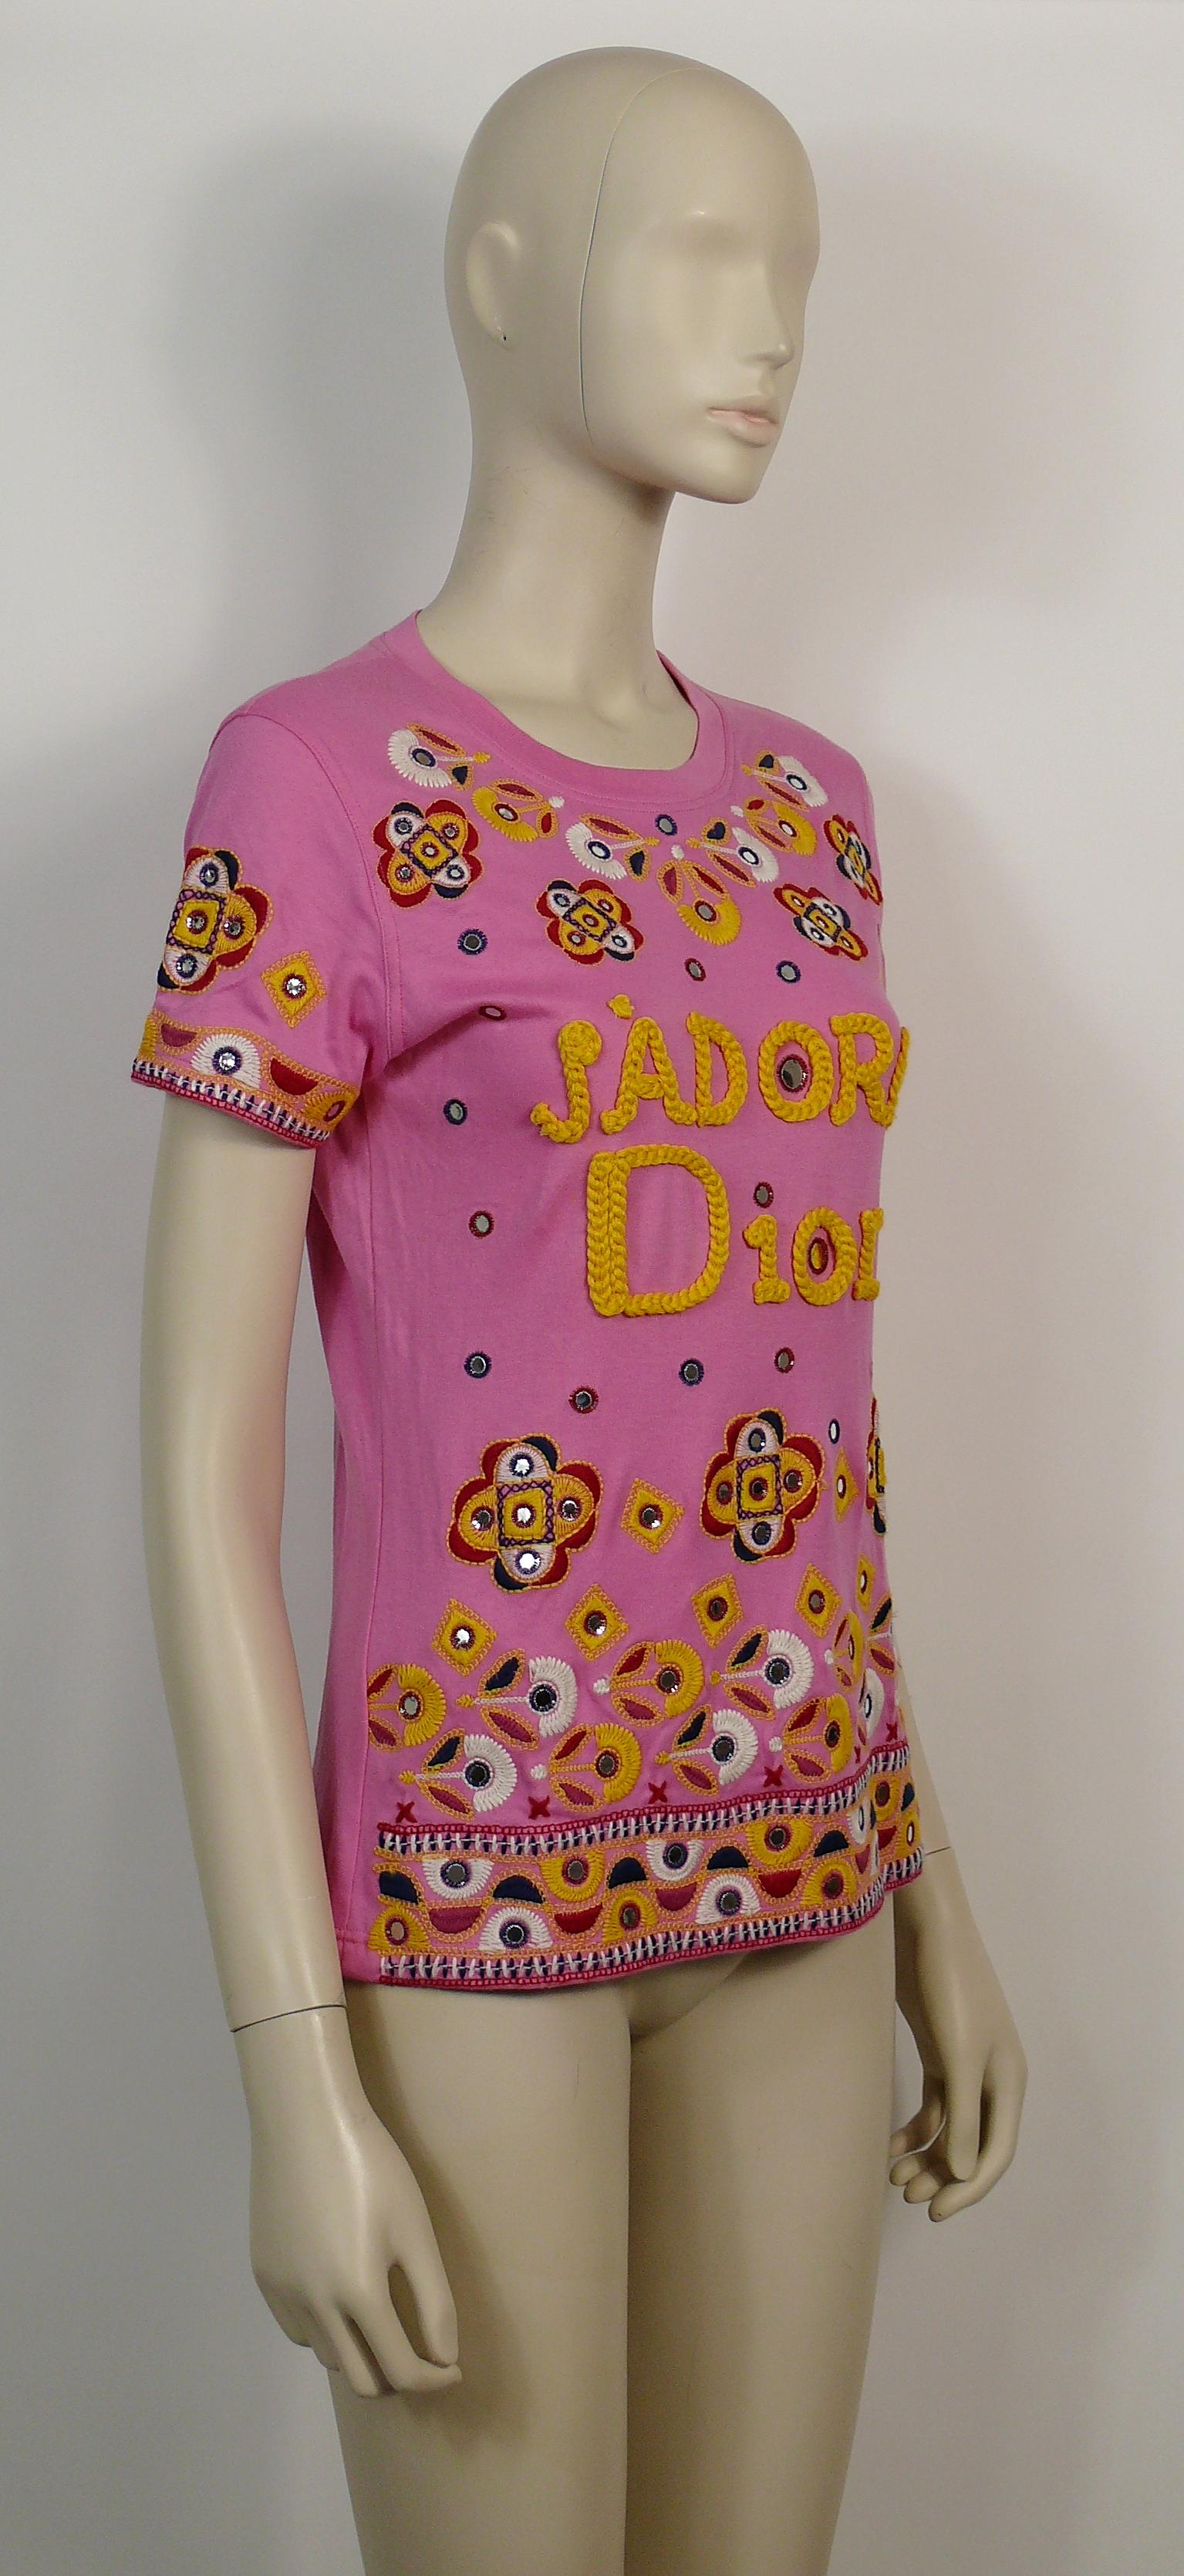 CHRISTIAN DIOR pink J'ADORE DIOR t-shirt featuring embroideries and faux mirrors.

Label reads CHRISTIAN DIOR BOUTIQUE Paris.
Made in Italy.

Size tag reads : F 38 / GB 10 / D 36 / USA 6.
Please refer to measurements. 

Composition tag reads : 100%